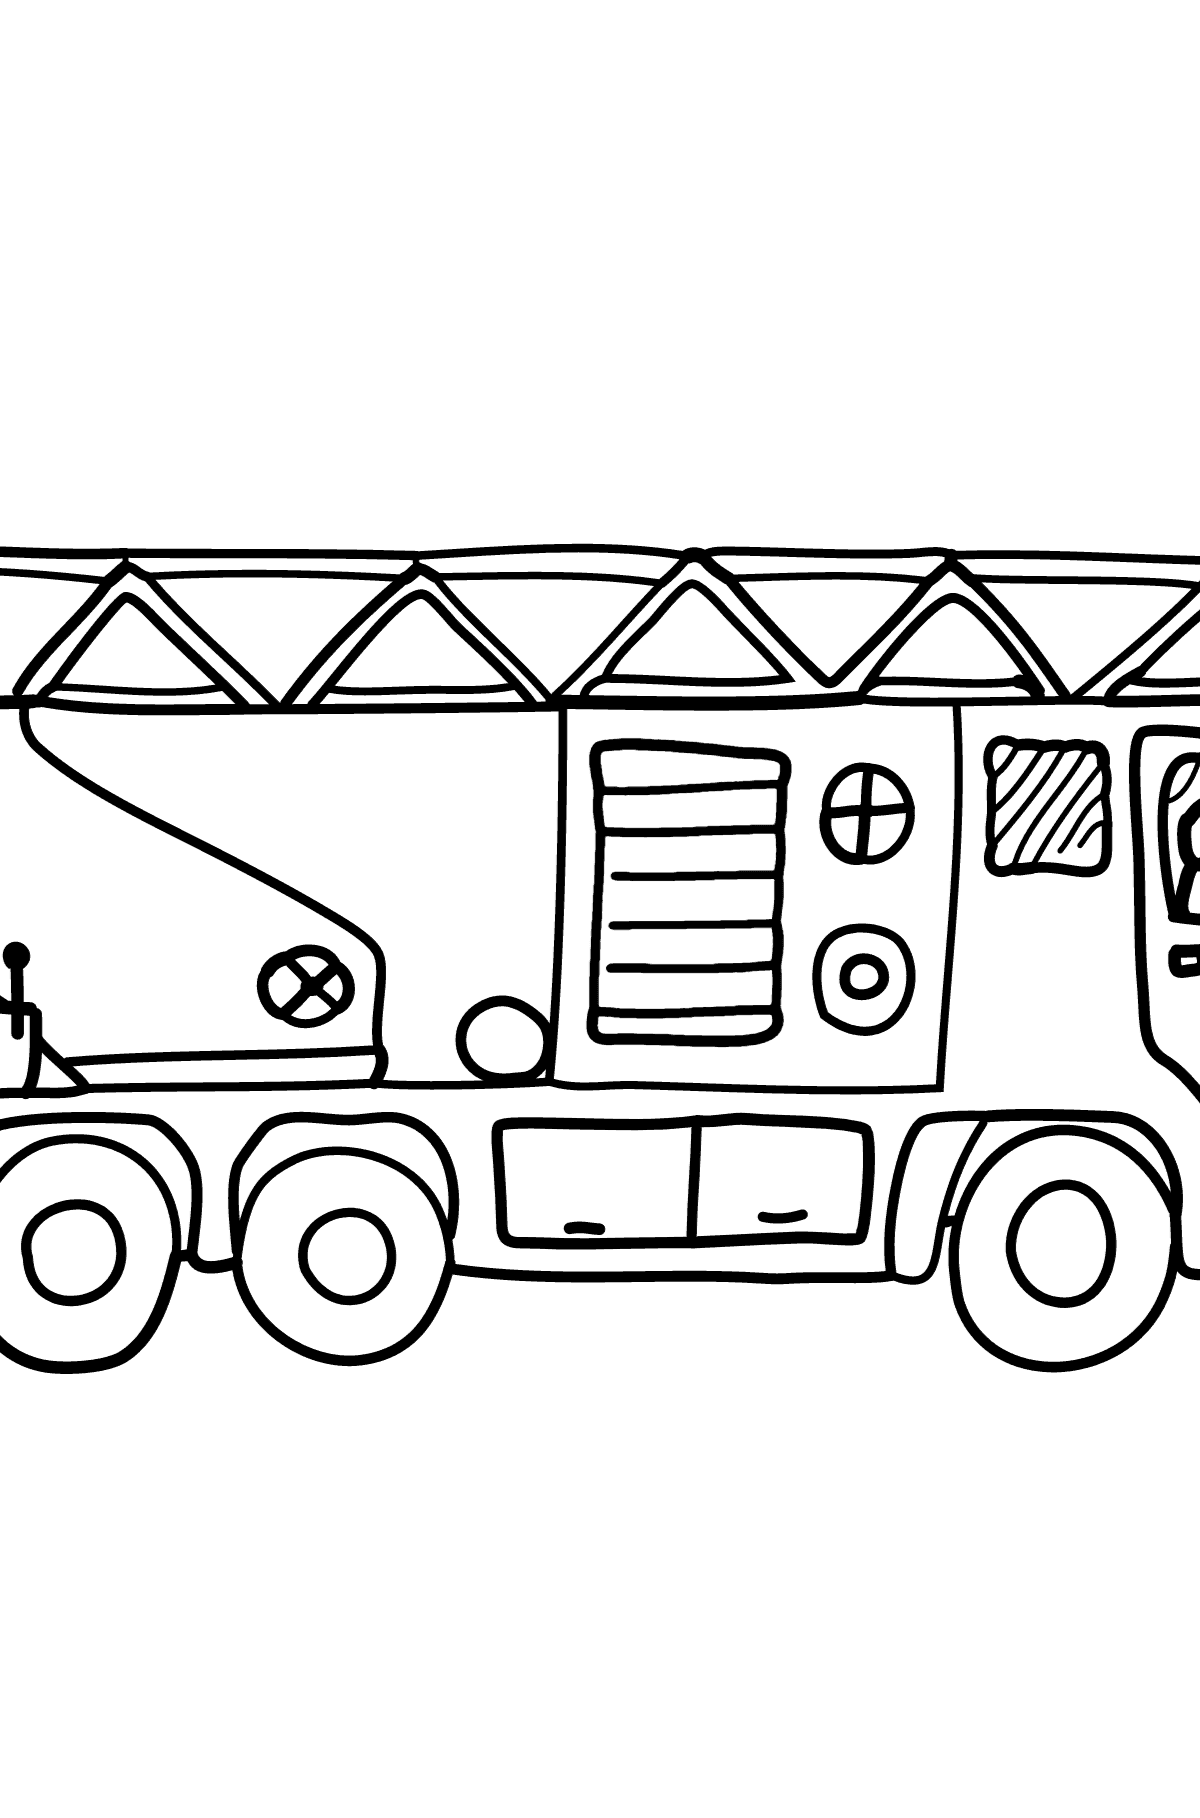 Coloring Page - A Fire Truck for Children 